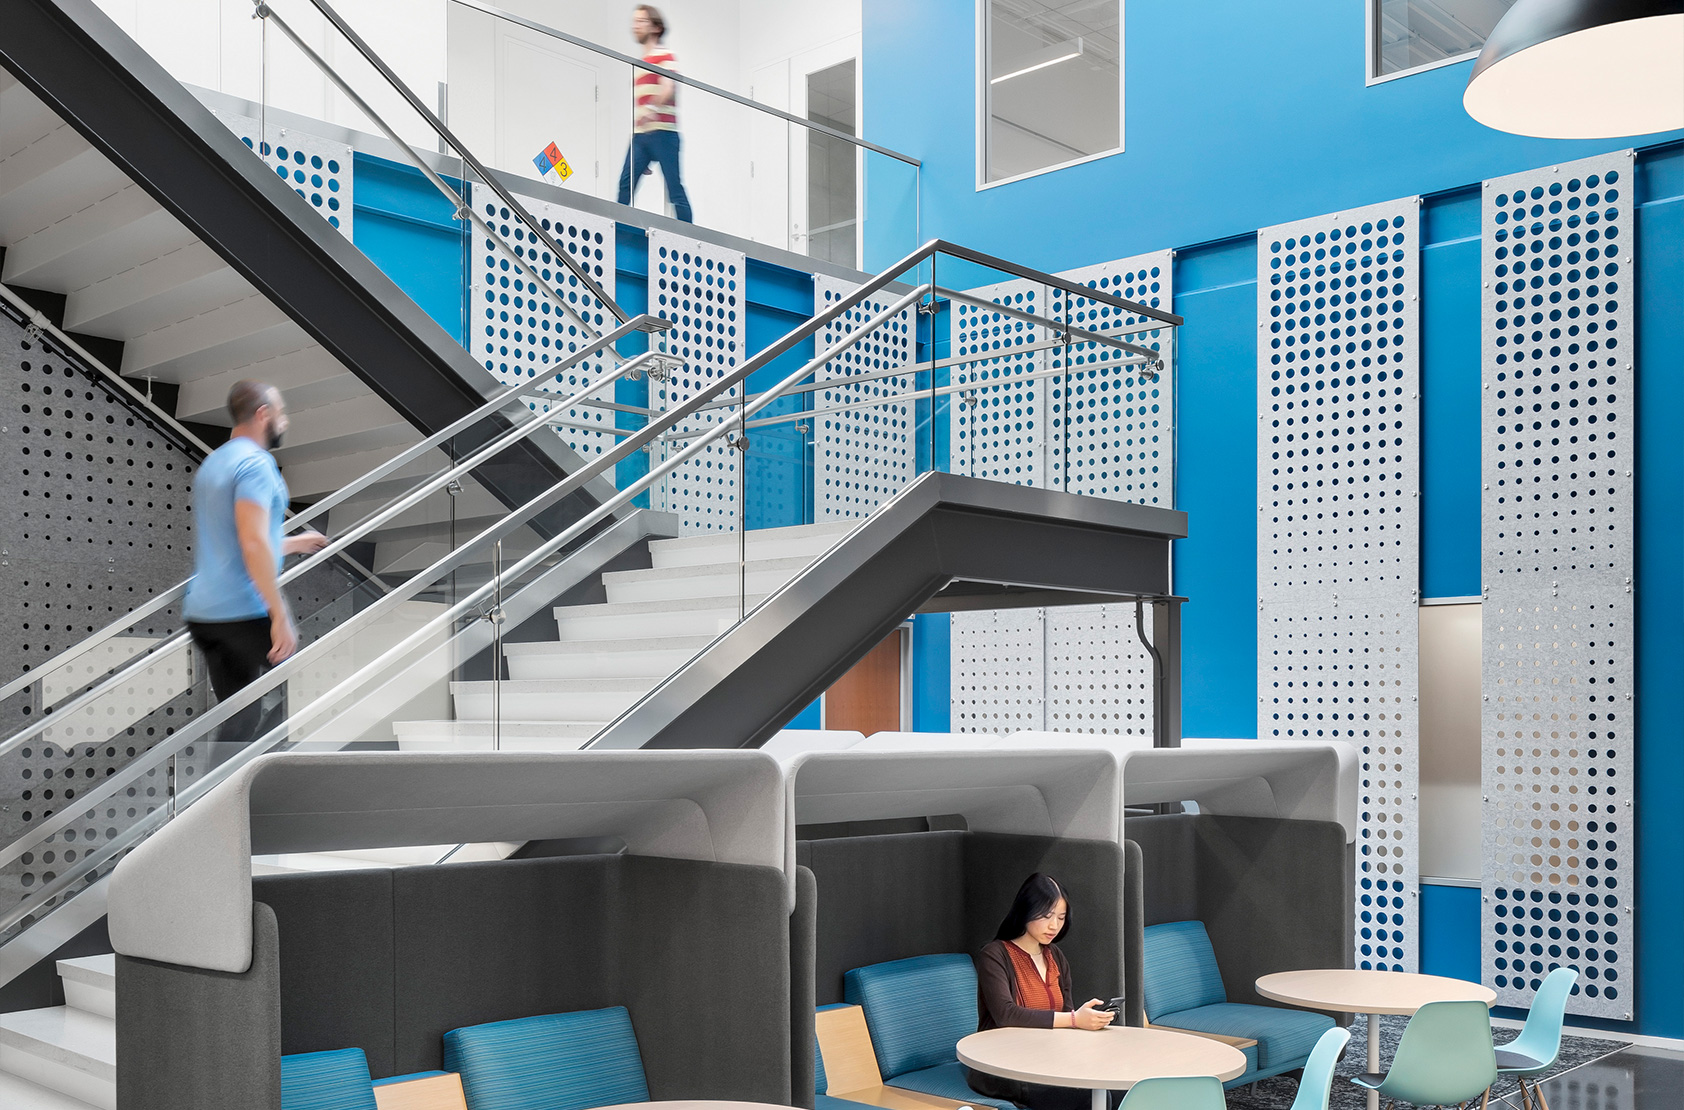 Confidential Client - School of Medicine Laboratory and Office Renovation